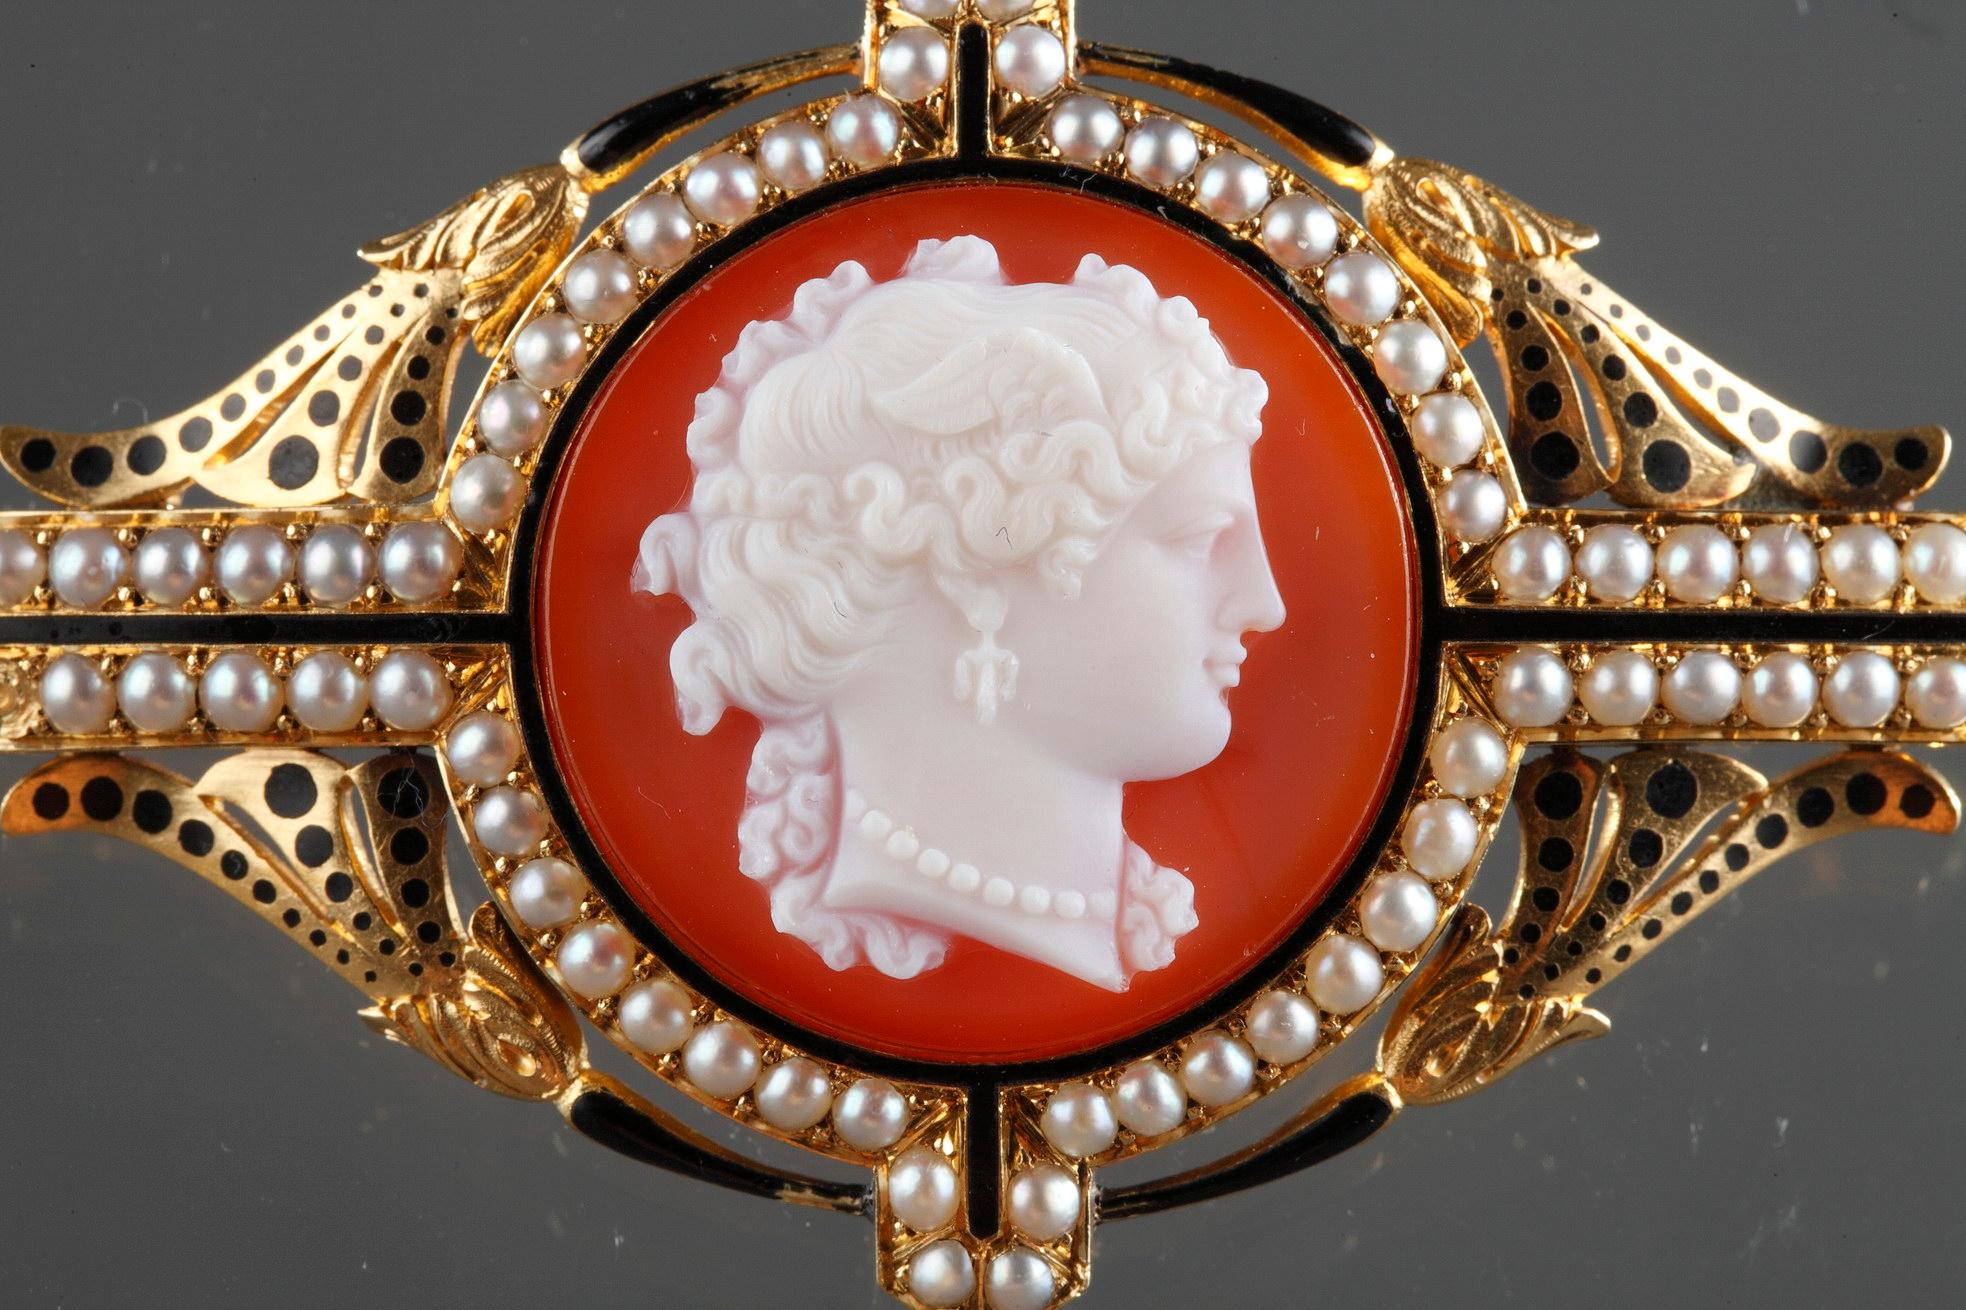 A gold-mounted agate cameo brooch depicting the bust of a young woman wearing a pearl necklace. Openwork gold mounts decorated with pearls and black enamel floral motives. Ancient clasp.
French hallmark for gold : eagle's head (tête